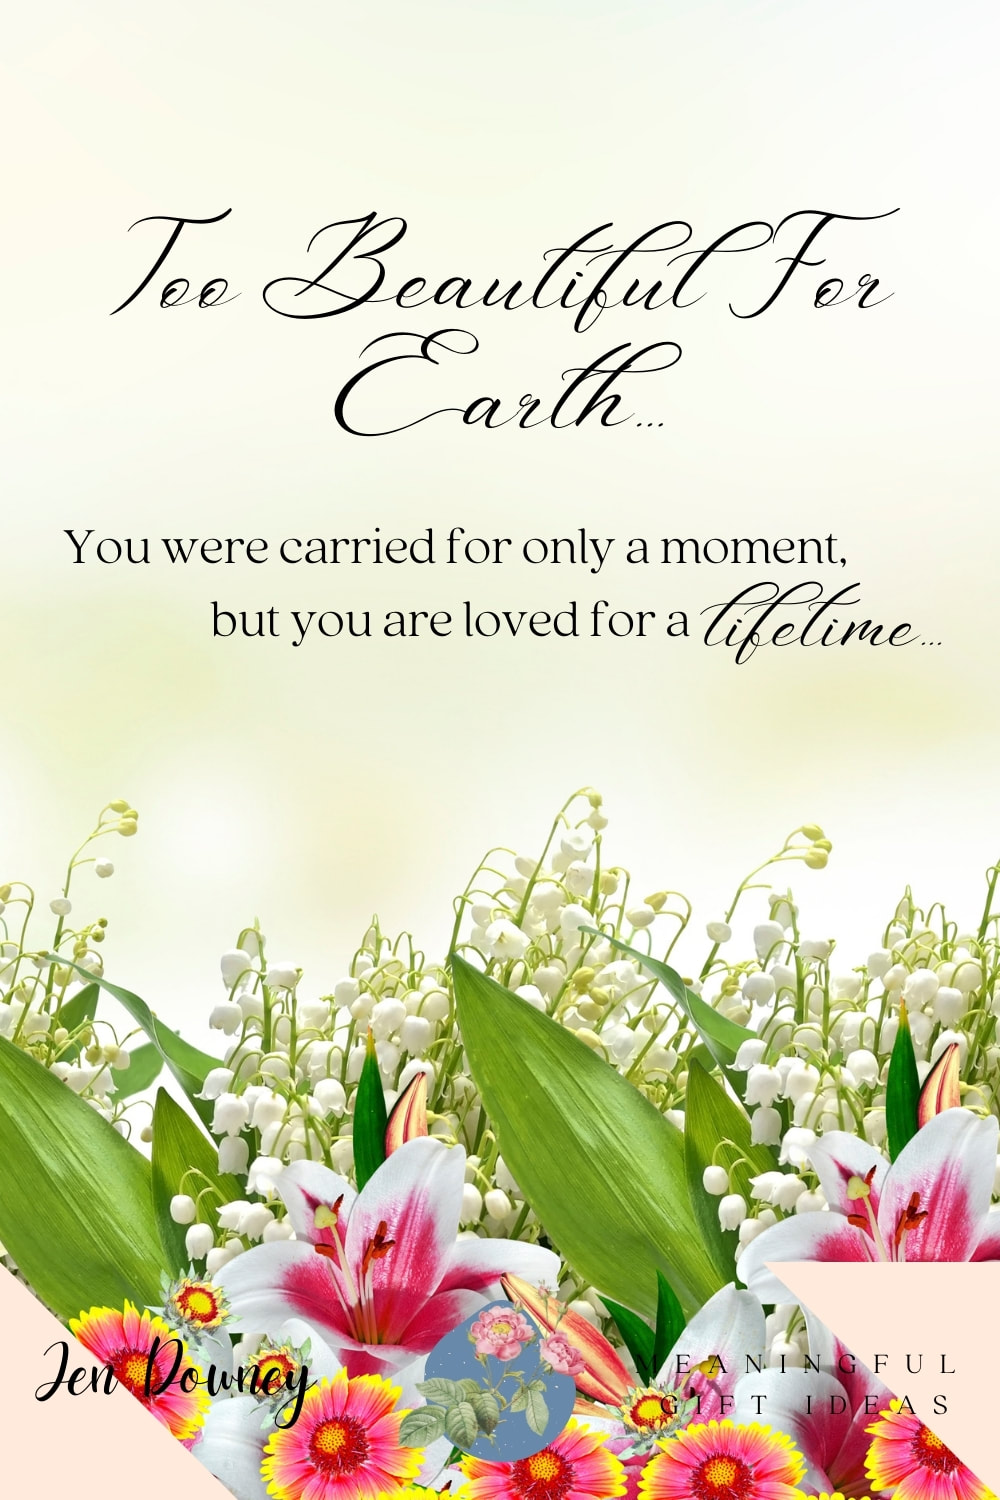 too beauitful for earth miscarriage quote